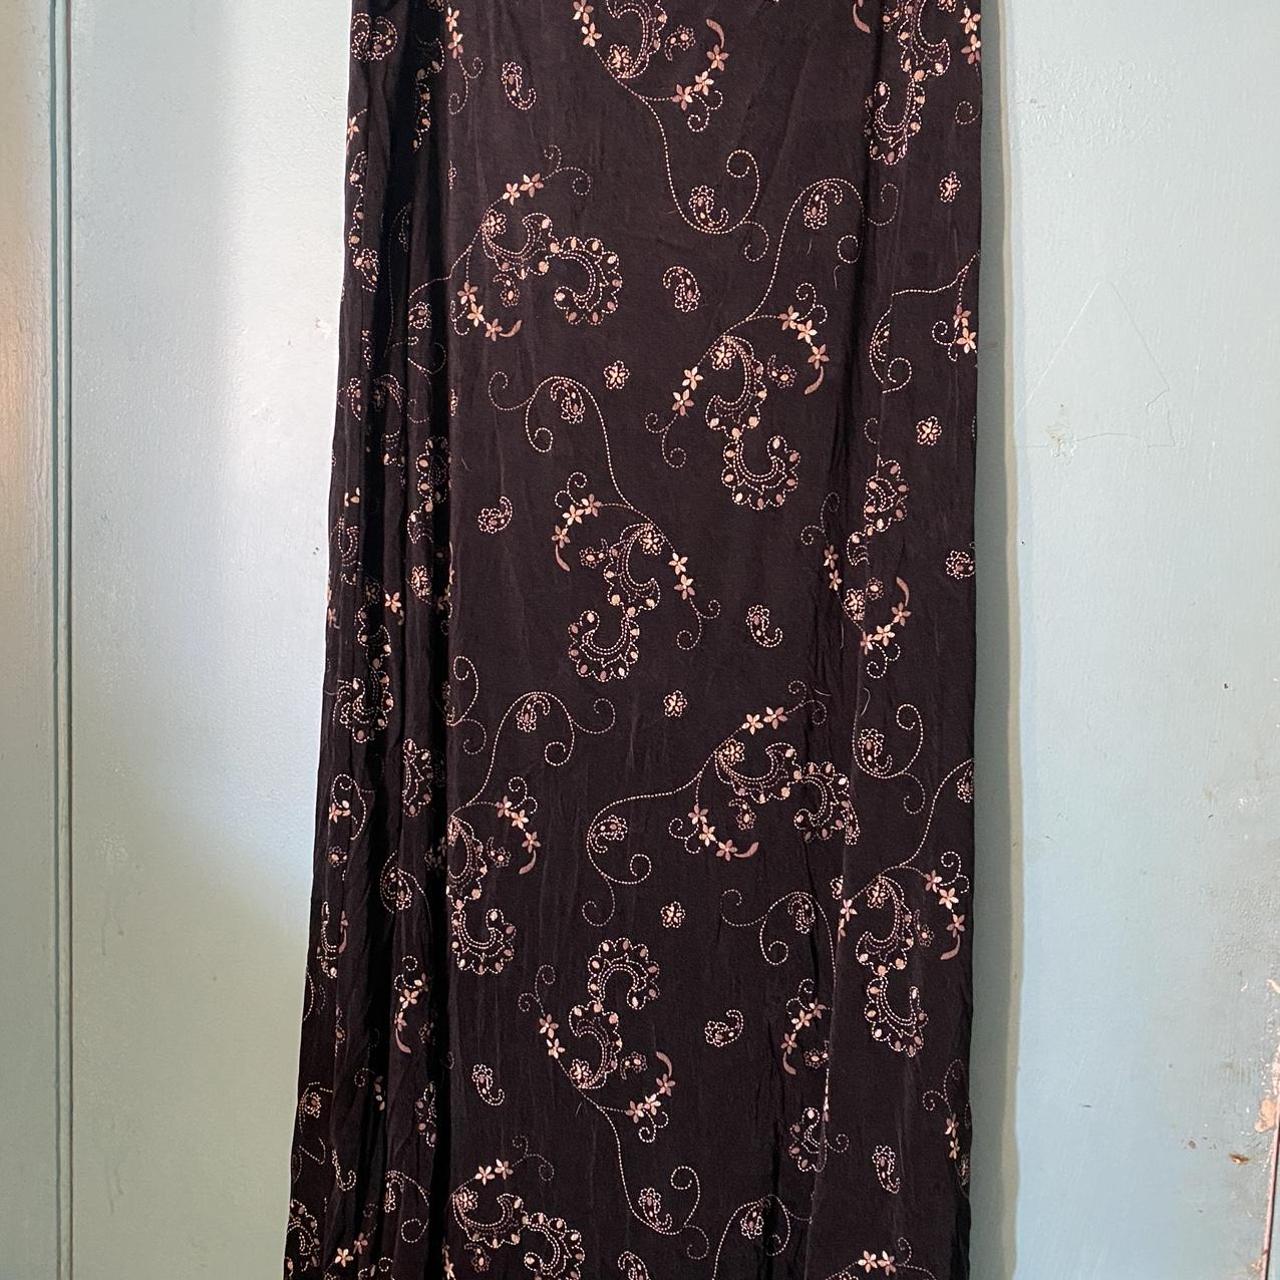 Product Image 3 - Slinky 90’s Maxi Skirt!
Super cute